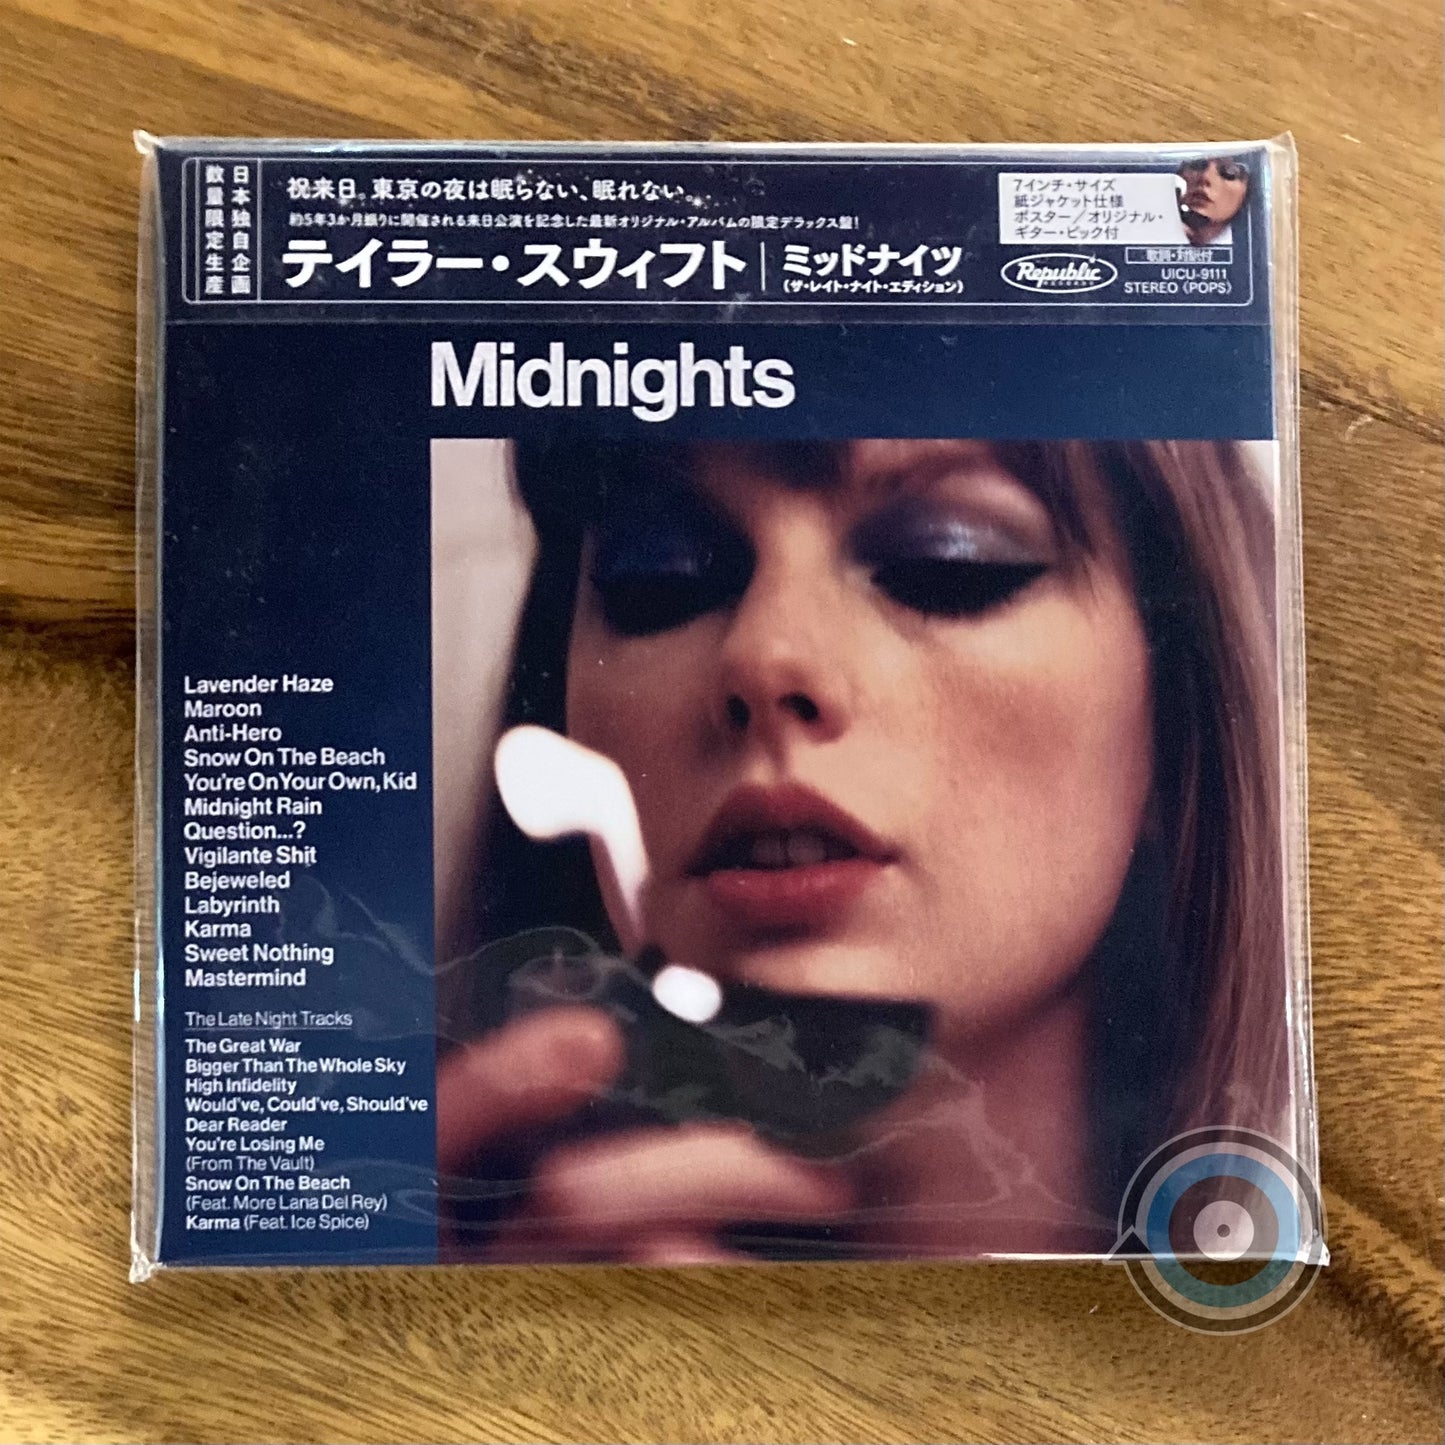 Taylor Swift – Midnights (The Late Night Edition) CD (Japan)